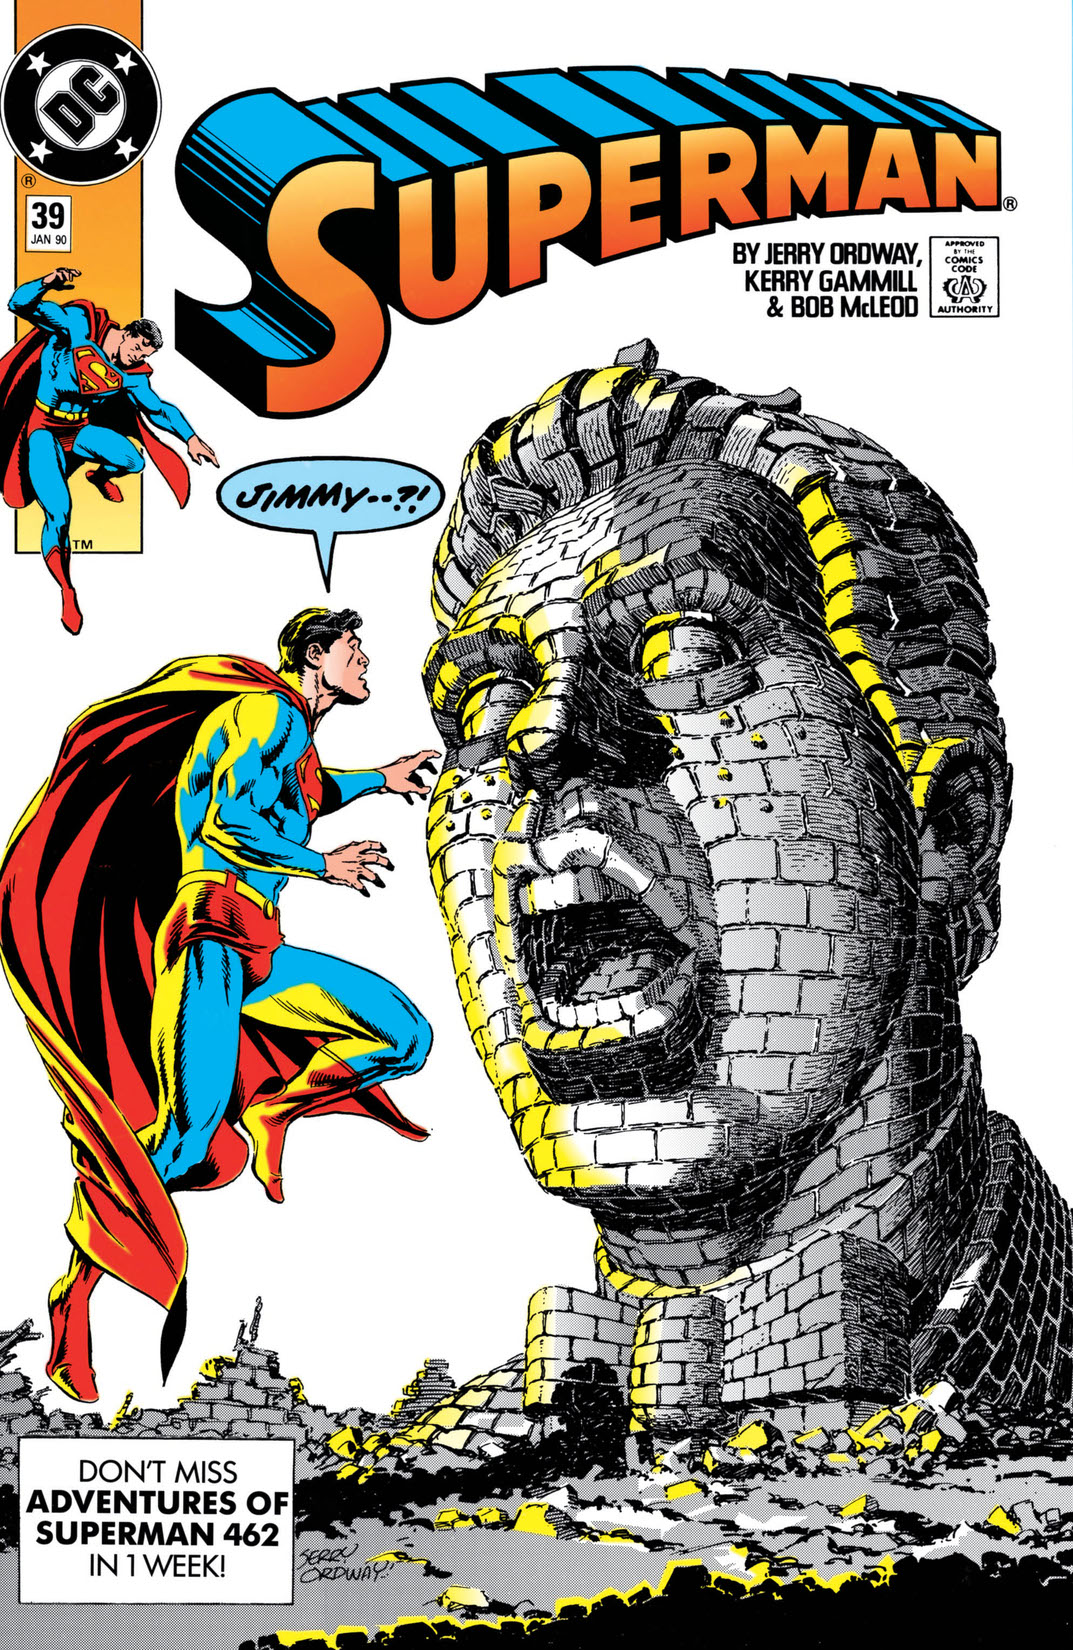 Superman (1986-) #39 preview images